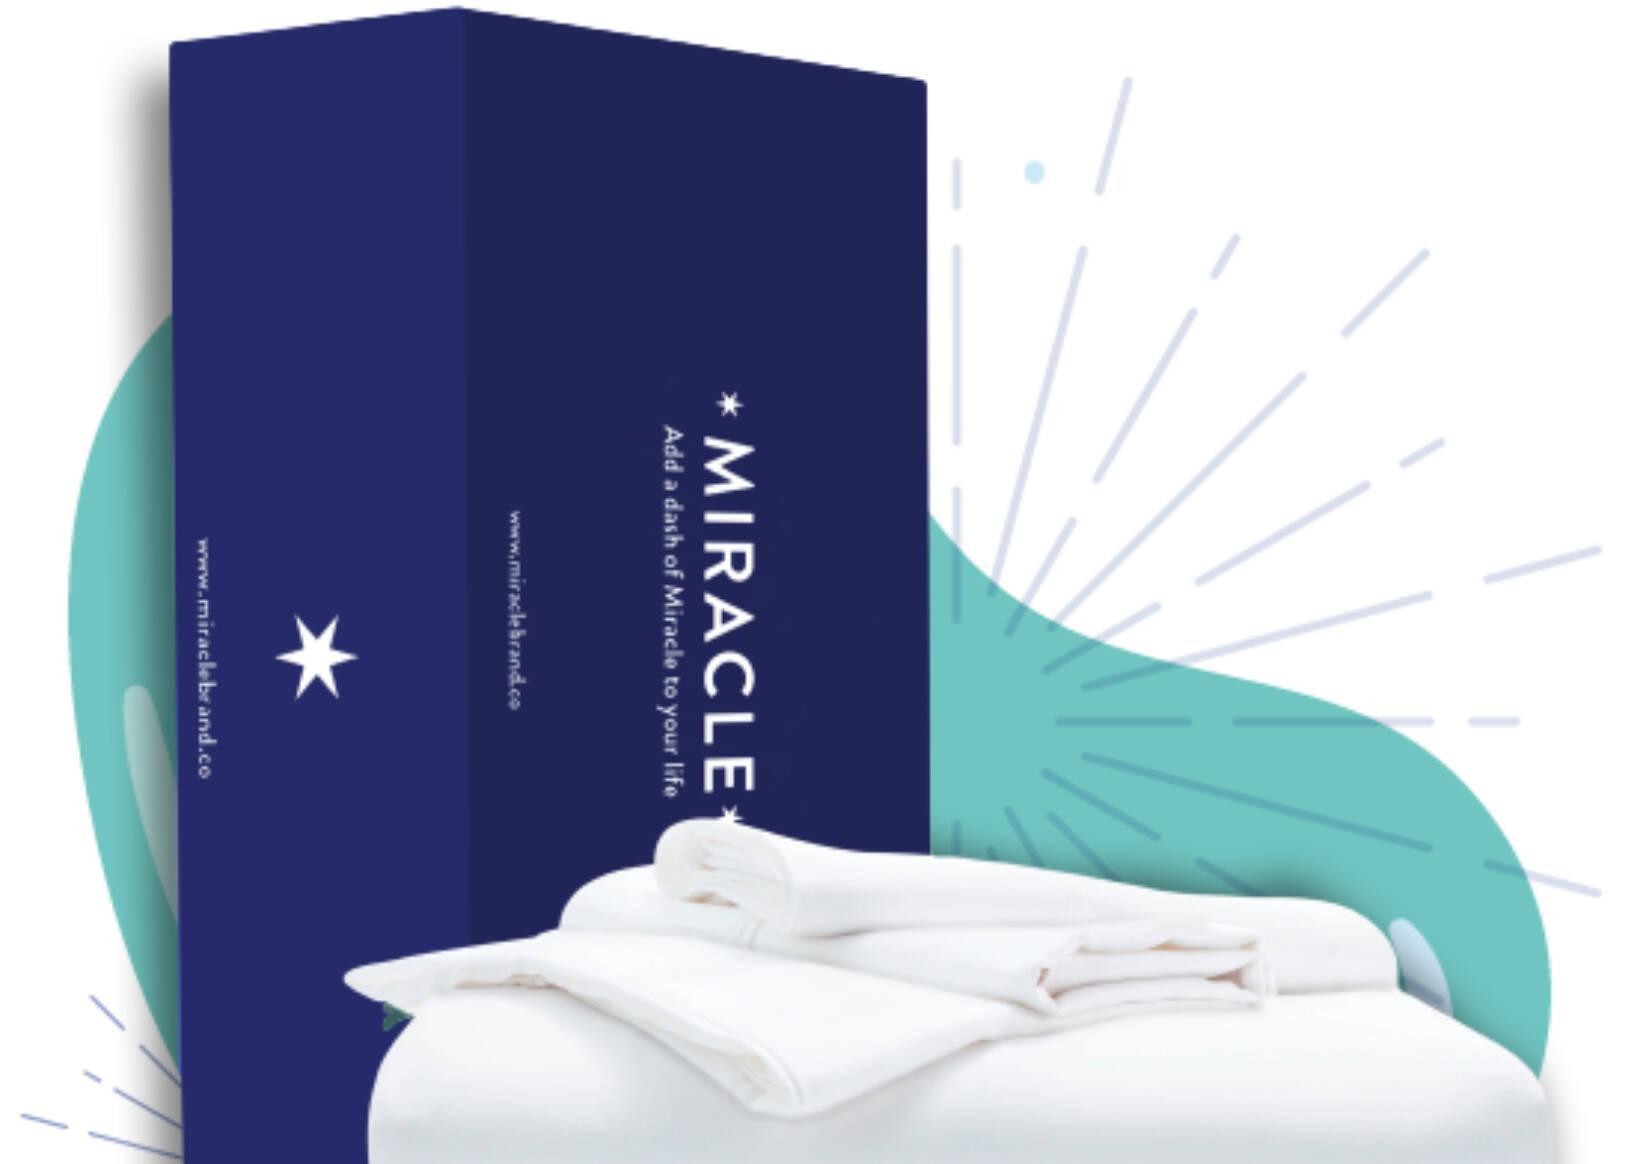 Miracle Made® Bed Sheets: Why Americans are raving about them